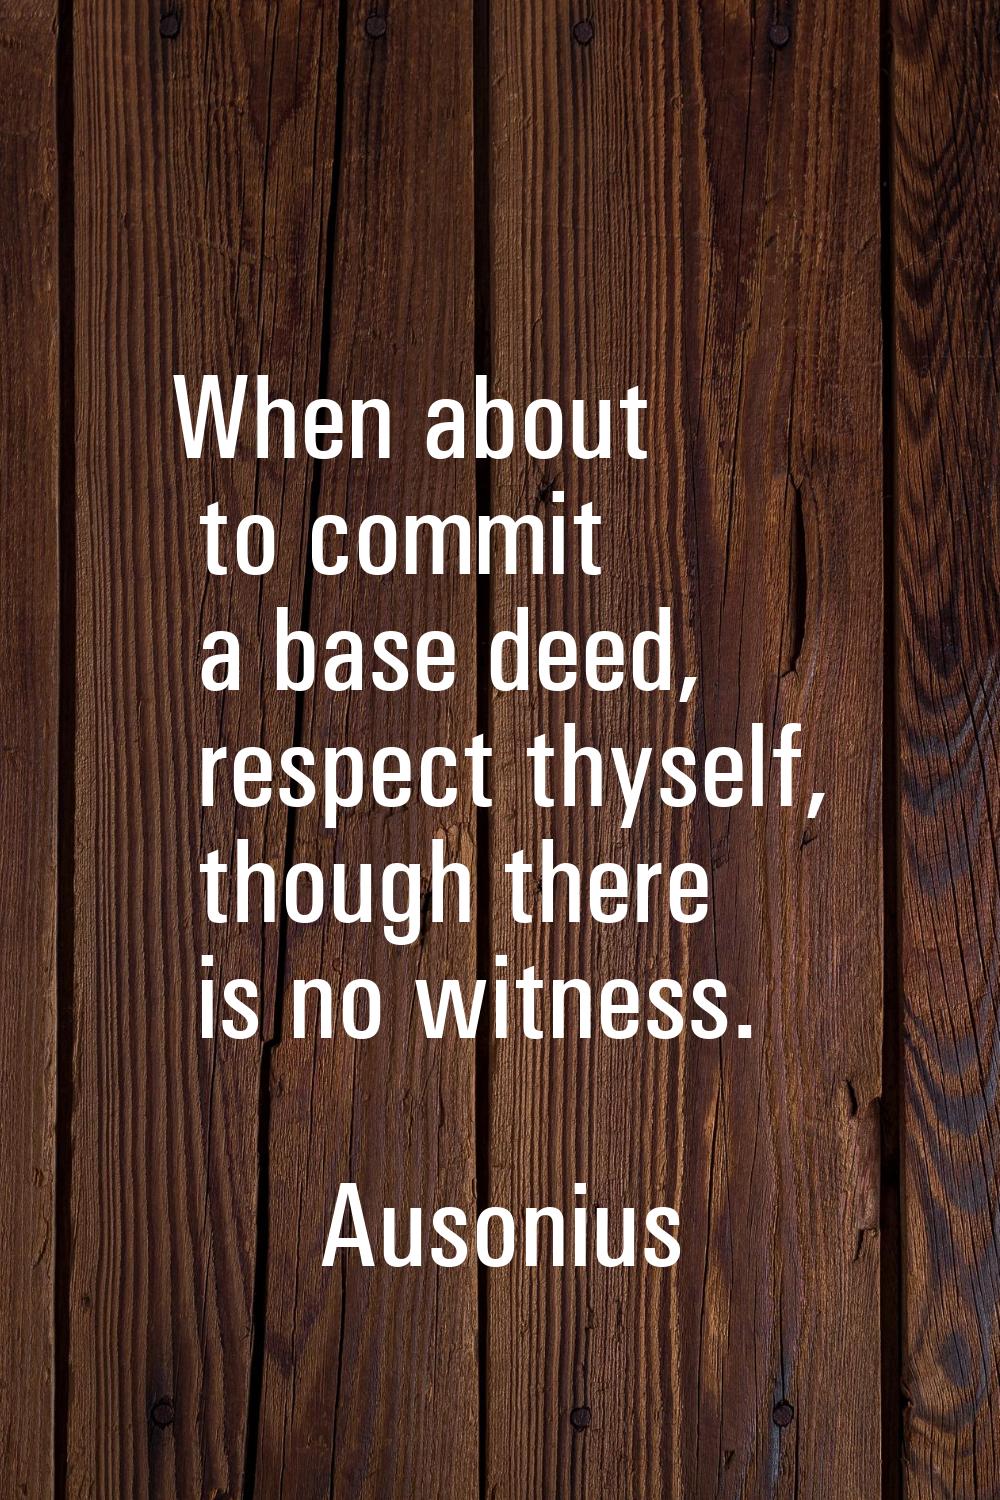 When about to commit a base deed, respect thyself, though there is no witness.